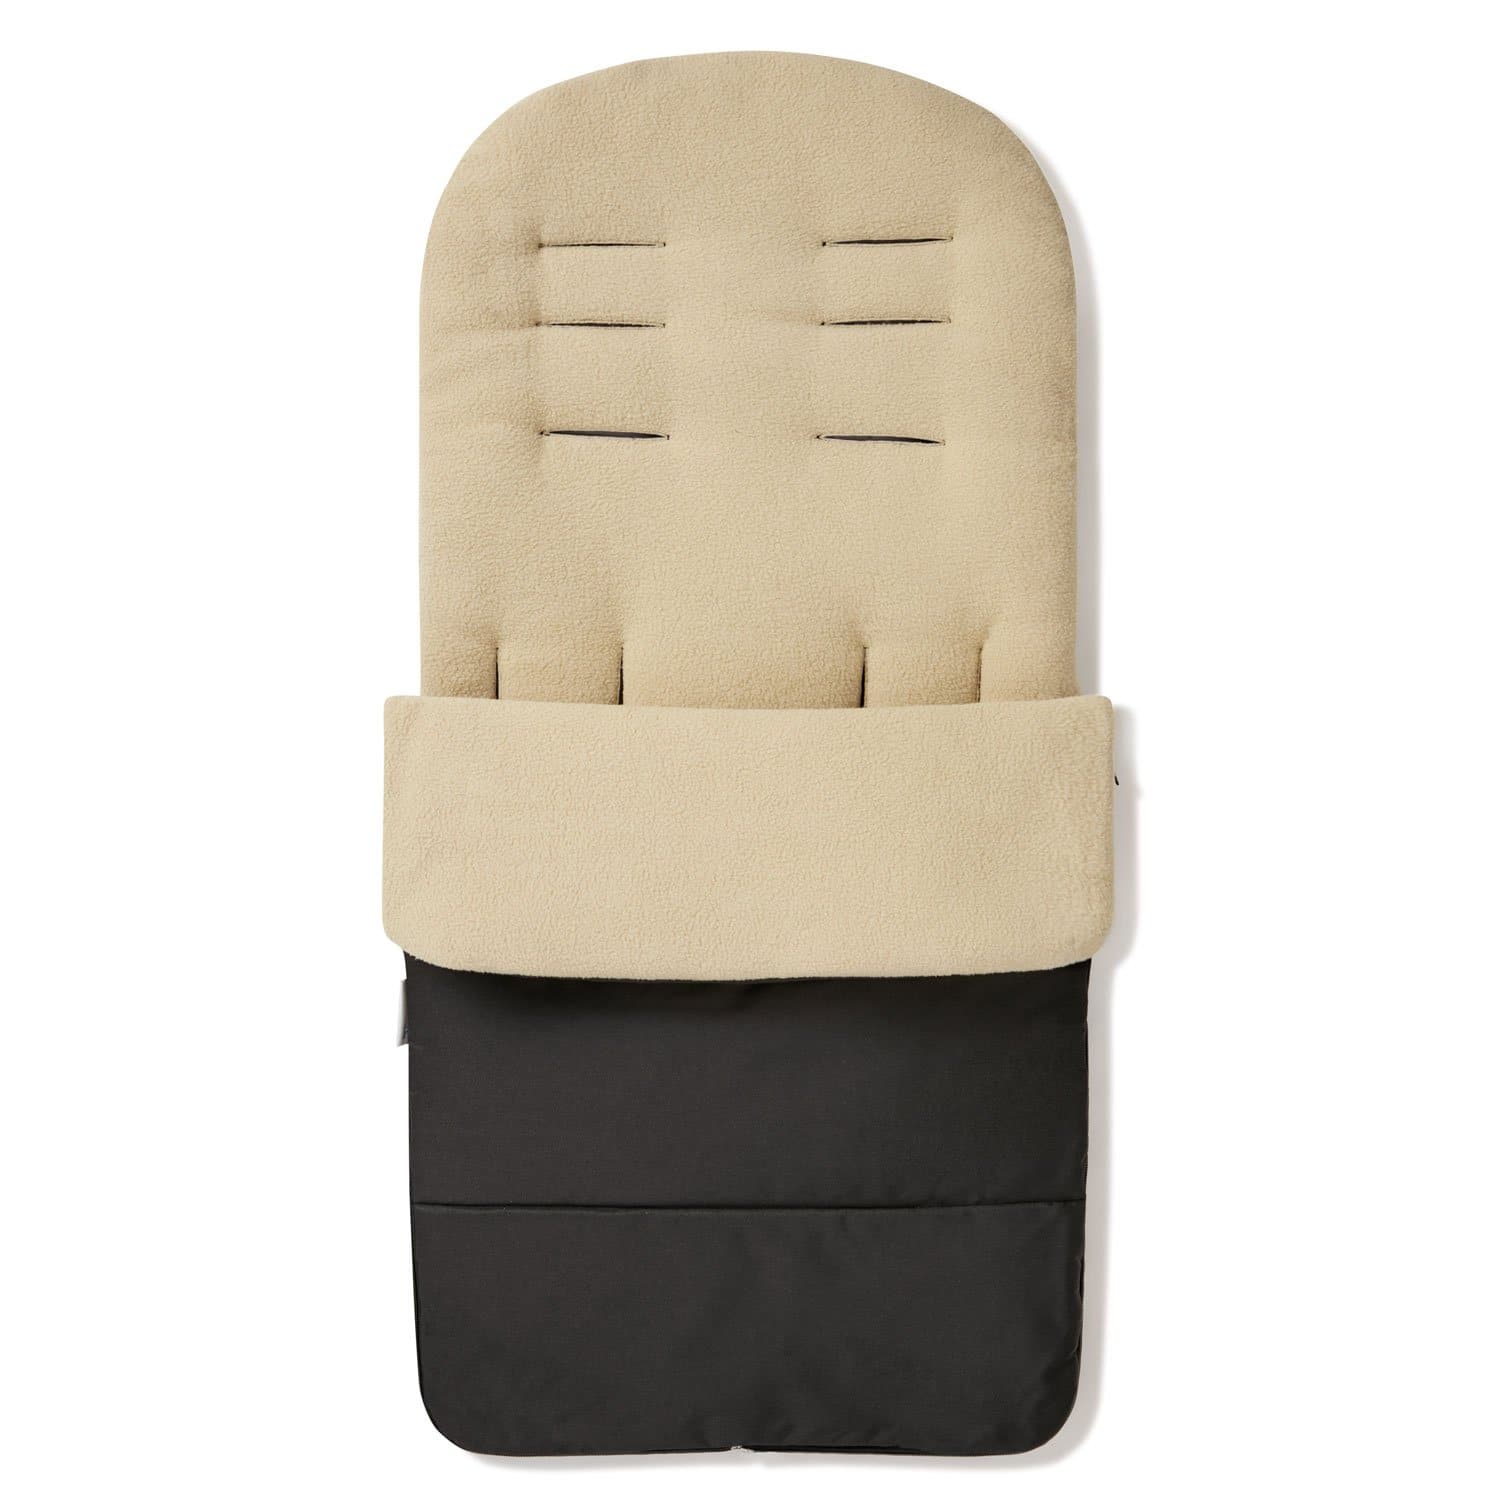 Premium Footmuff / Cosy Toes Compatible with Egg - Desert Sand / Fits All Models | For Your Little One